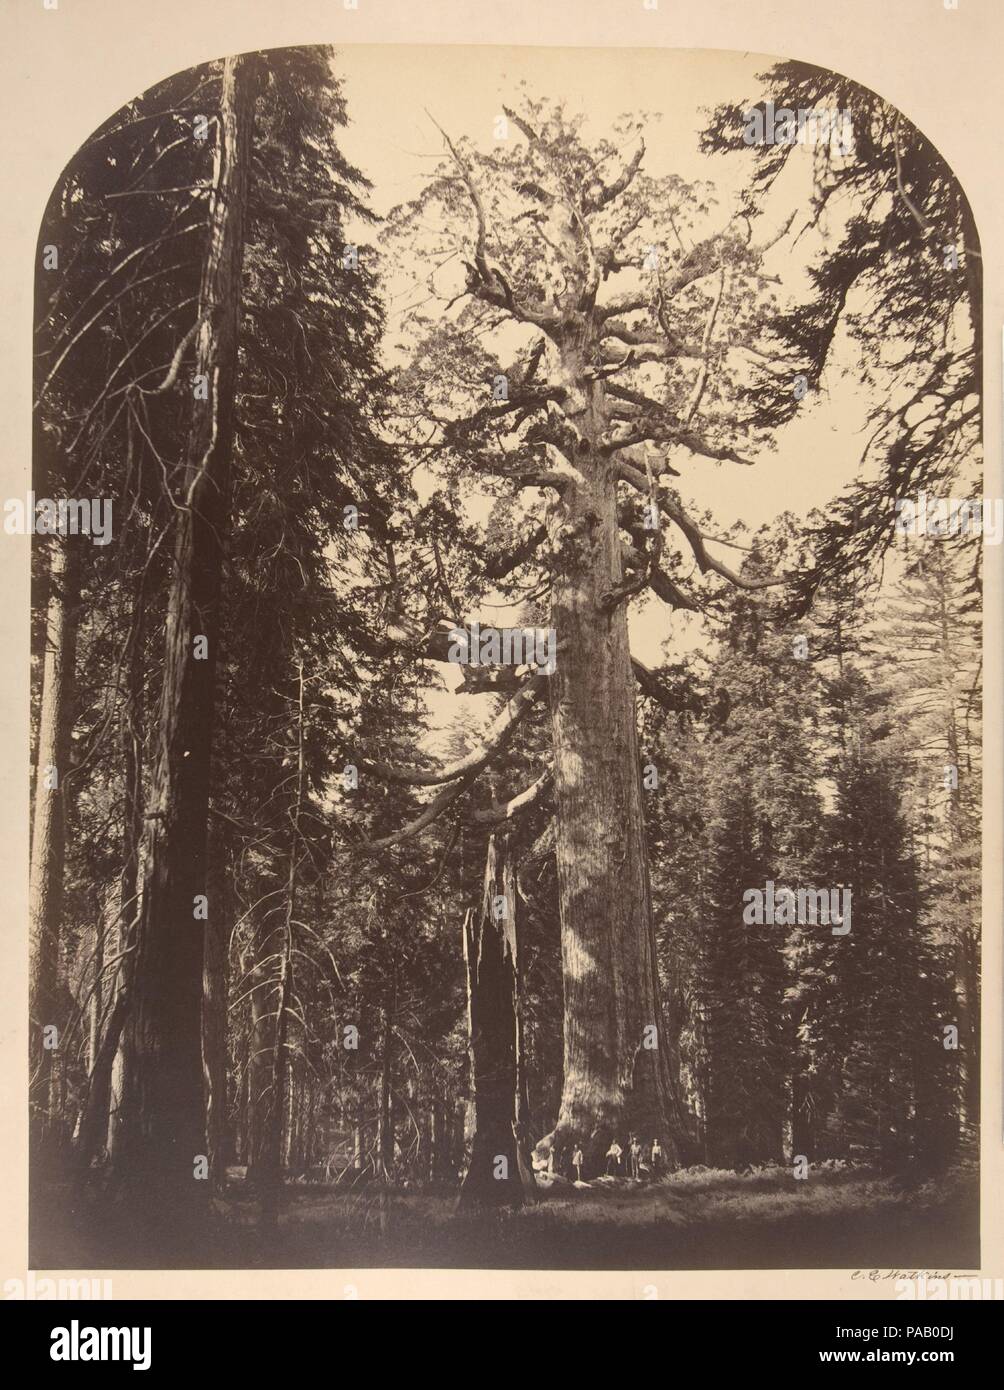 The Grisly Giant, Mariposa Grove, Yosemite. Artist: Carleton E. Watkins (American, 1829-1916). Dimensions: Image: 52.3 x 40.7; Mount: 61.4 x 54.1. Date: 1861.  When he was twenty-one Carleton Watkins left Oneonta, New York, for California, following the example of Collis P. Huntington, another Oneonta native who had moved to California to make his fortune. After a stint in Huntington's store in Sacramento, Watkins moved to San Francisco where he chanced into an apprenticeship with Robert Vance, the famous daguerreotypist. By l858 Watkins had established an independent practice, photographing m Stock Photo